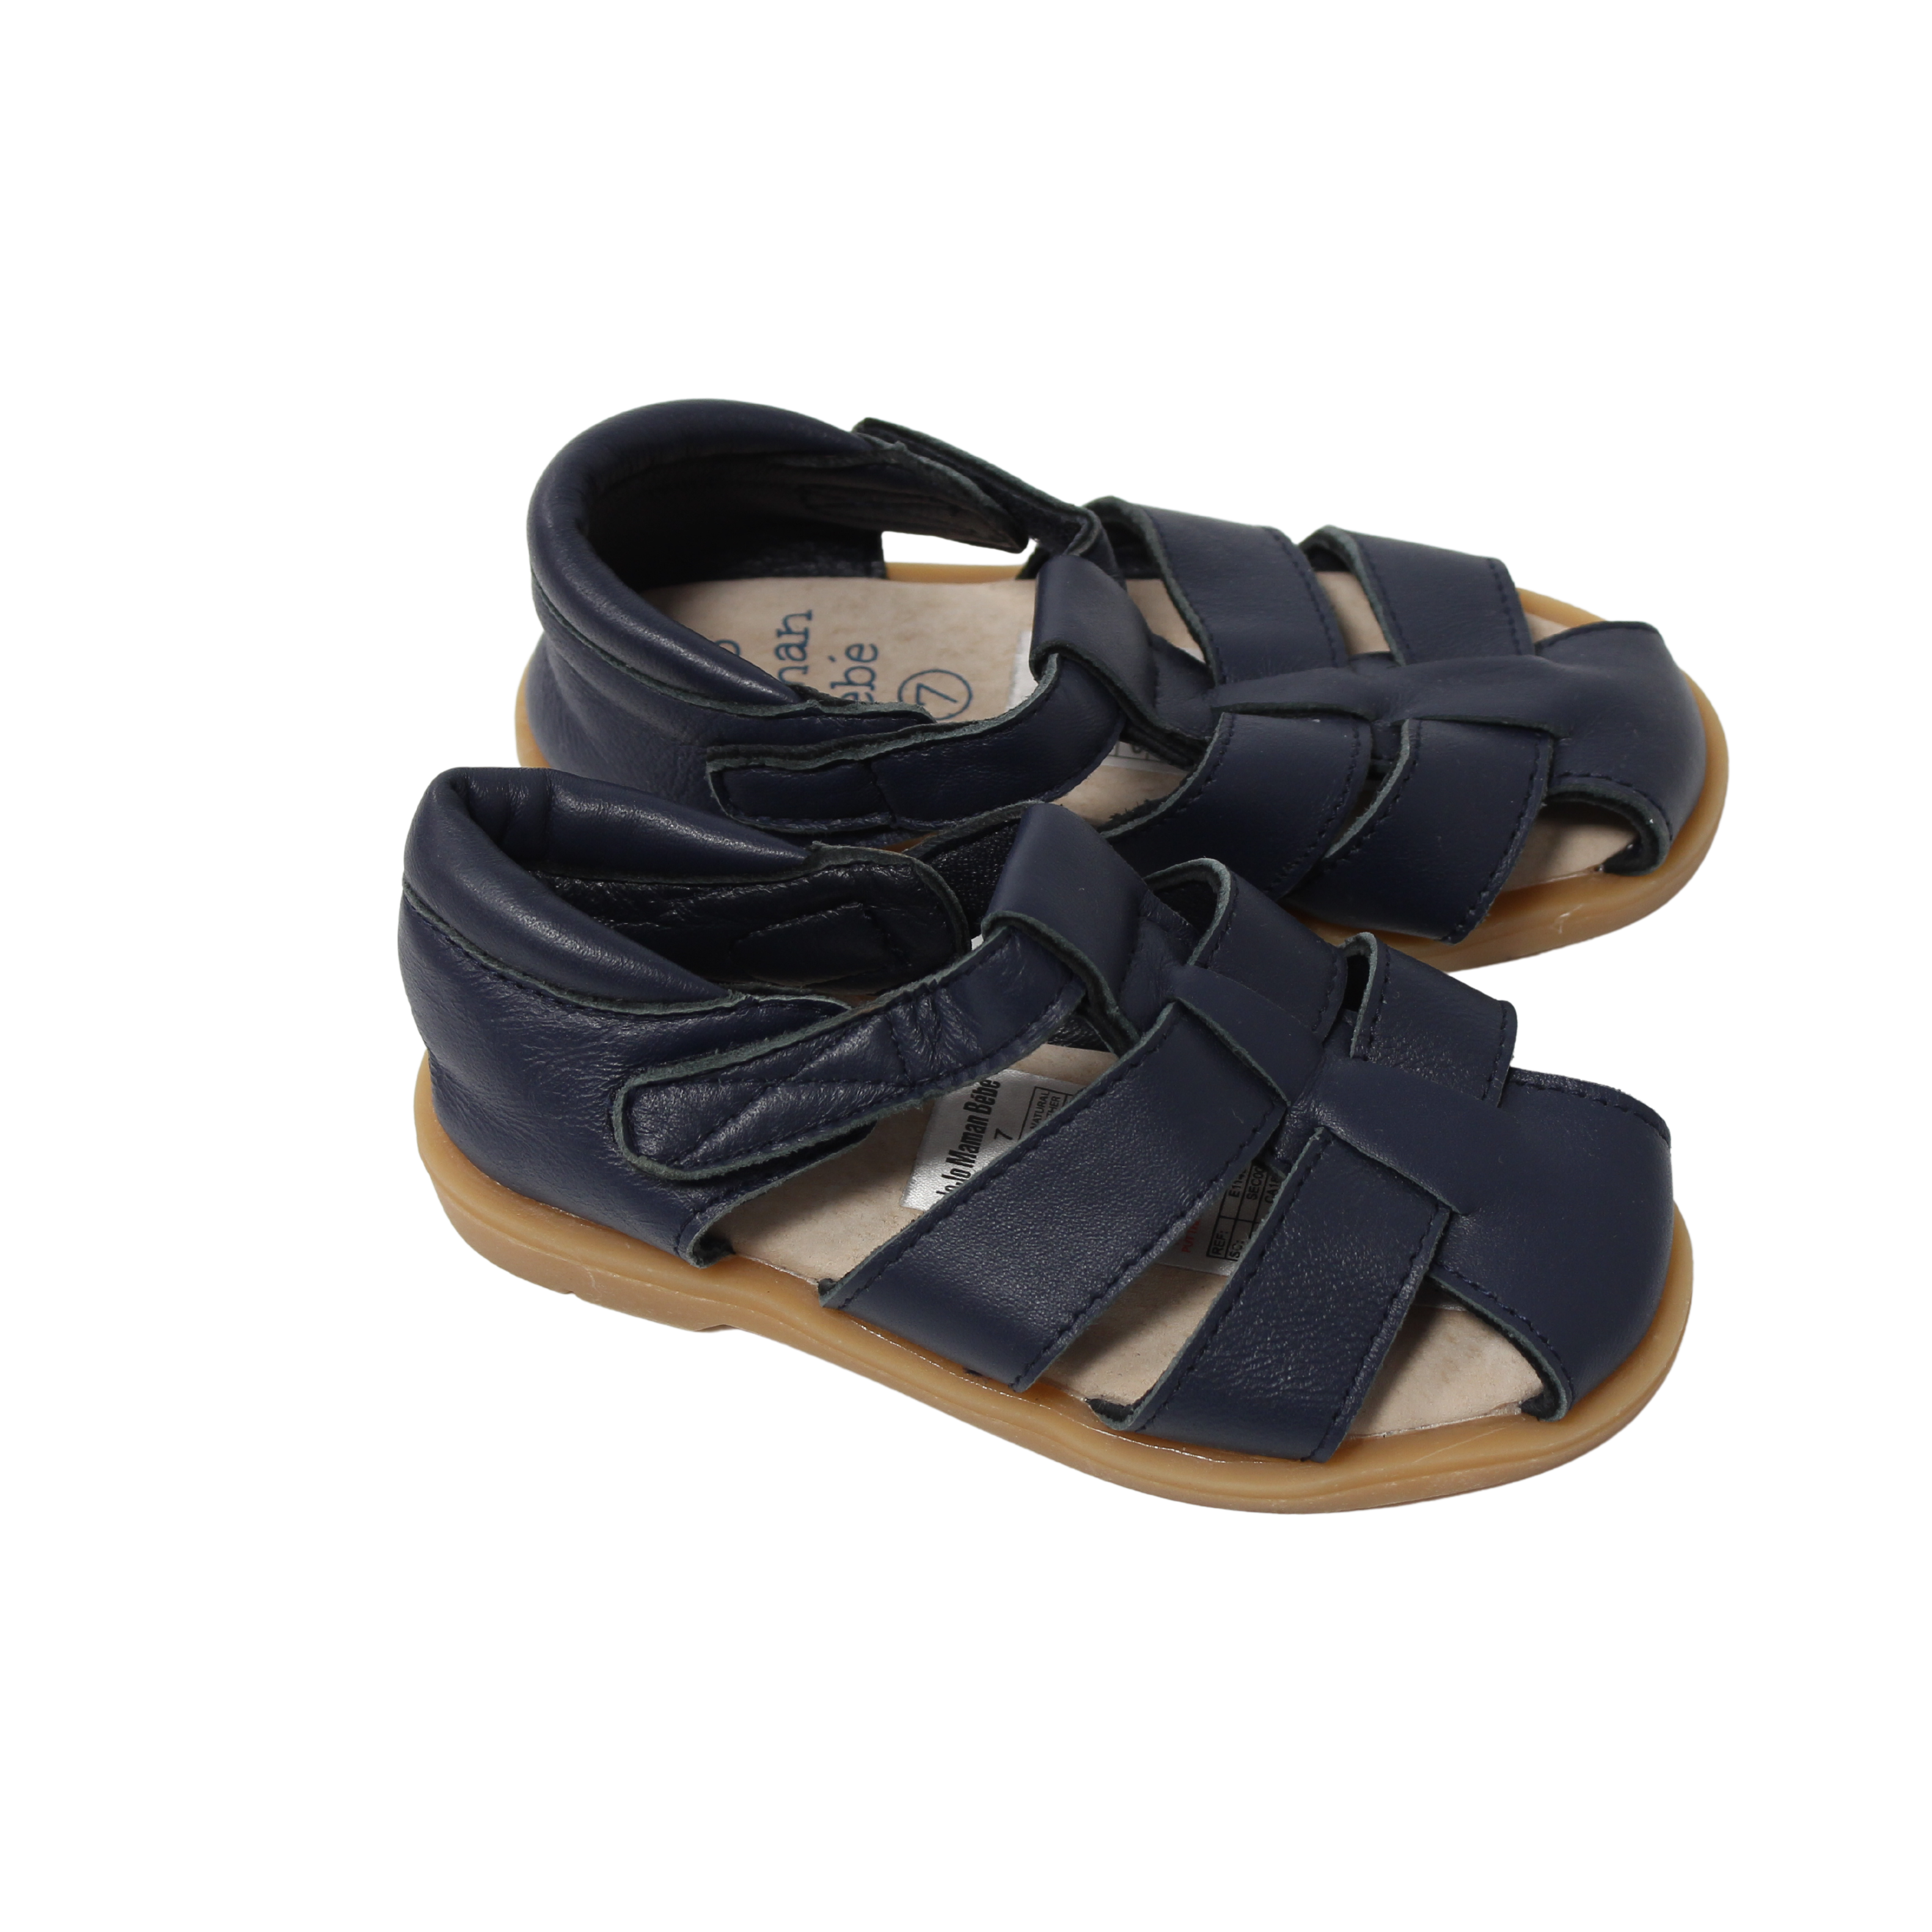 Navy Leather Sandals